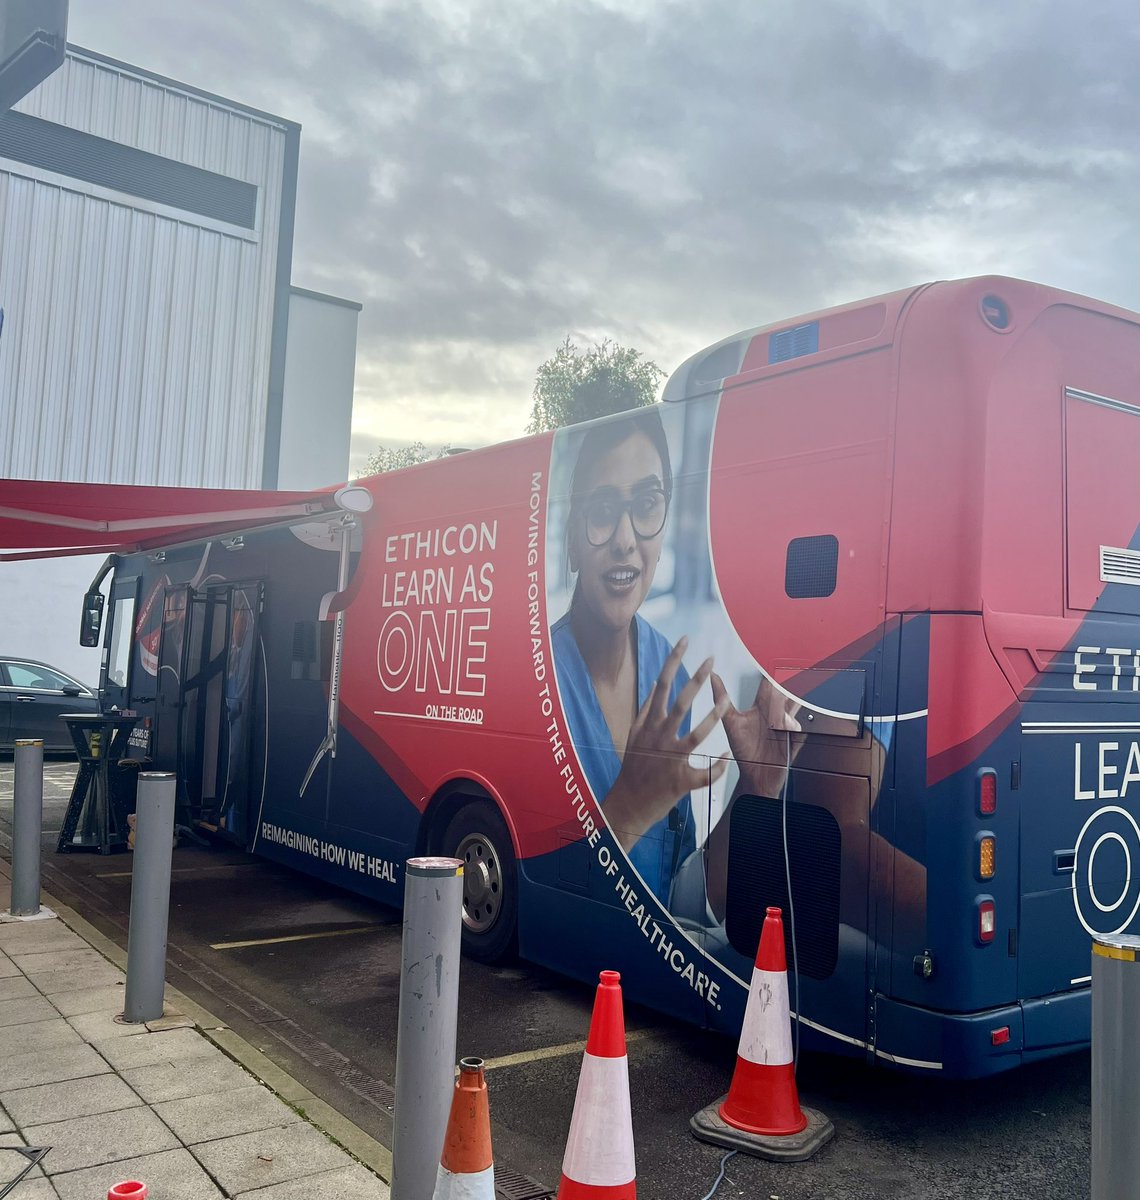 Took the opportunity to pop into the @Ethicon educational training Bus today to say hello and check out the simulation in action. Brilliant opportunity for our Trainees and Theatre Teams 🤩
#WalsallAndProud